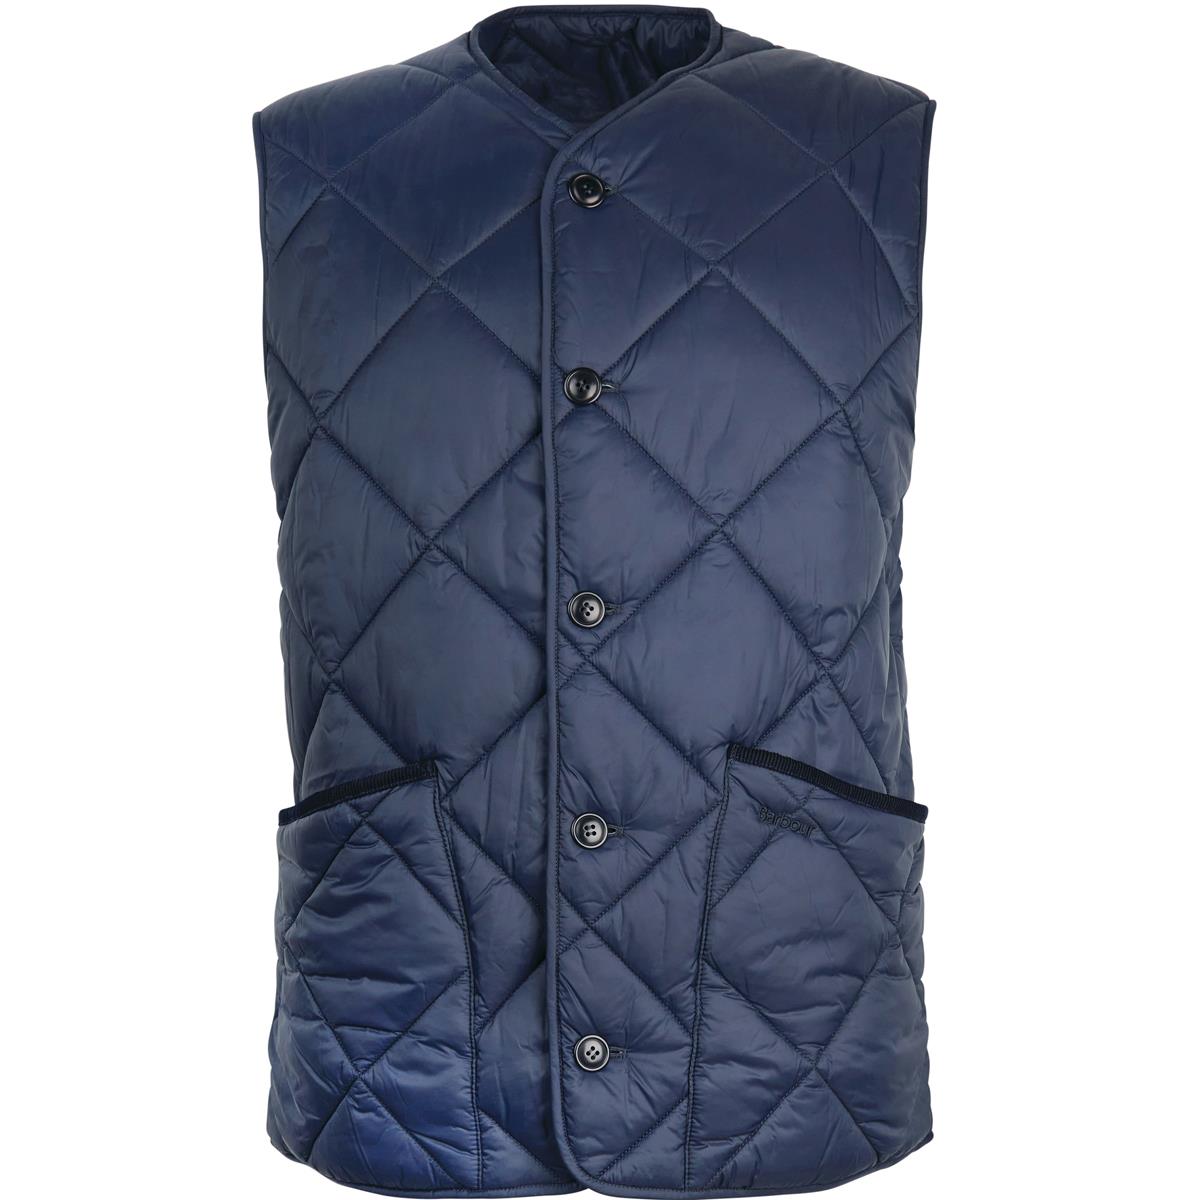 Is a Large Barbour Liddesdale Cardigan Gilet true to size 42?